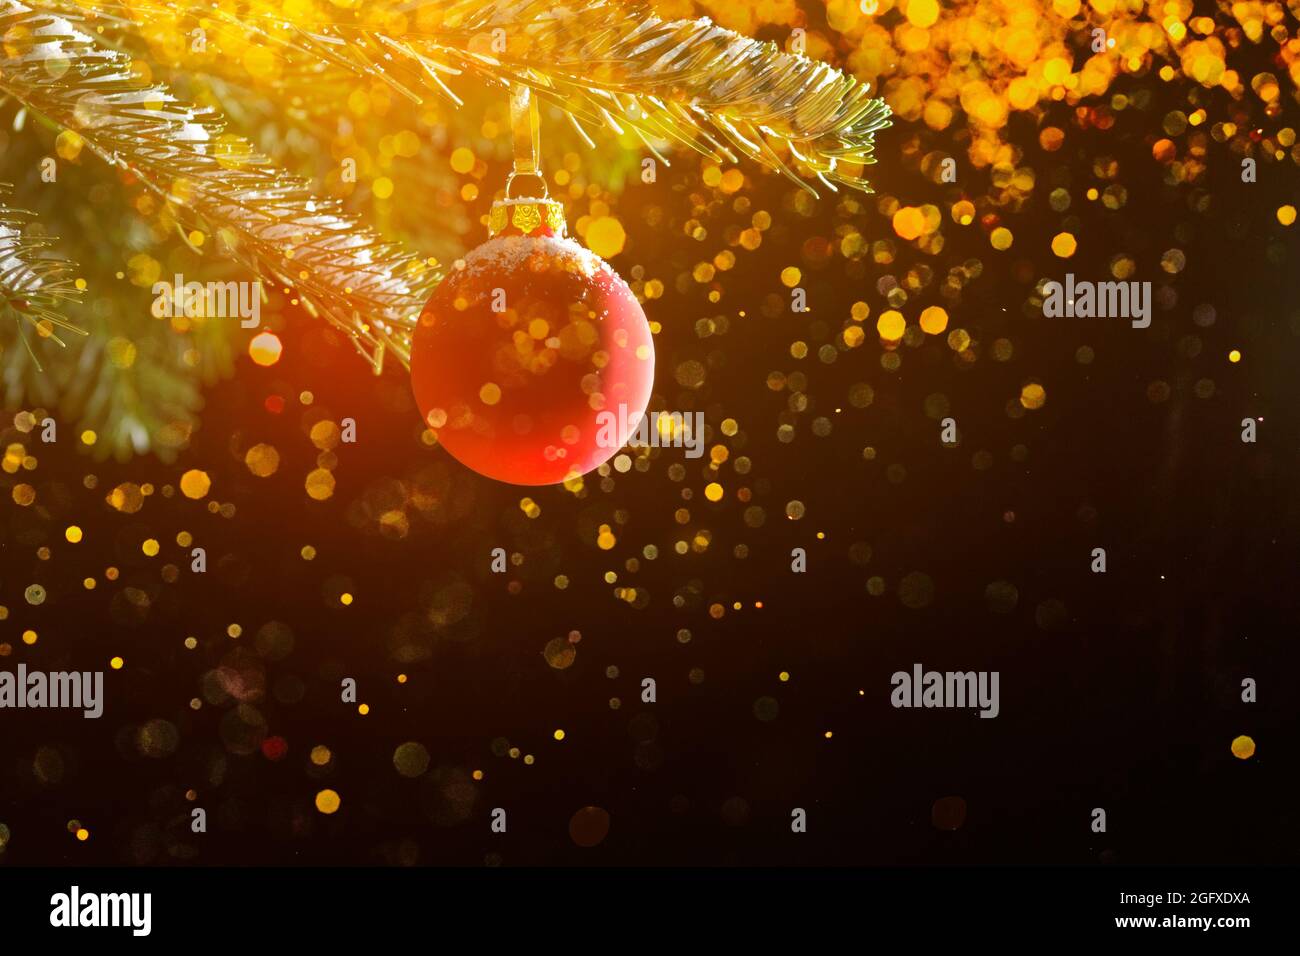 Red christmas ball on a fir branch in front of dark background, with lots of magical golden sparkles, copyspace. Stock Photo